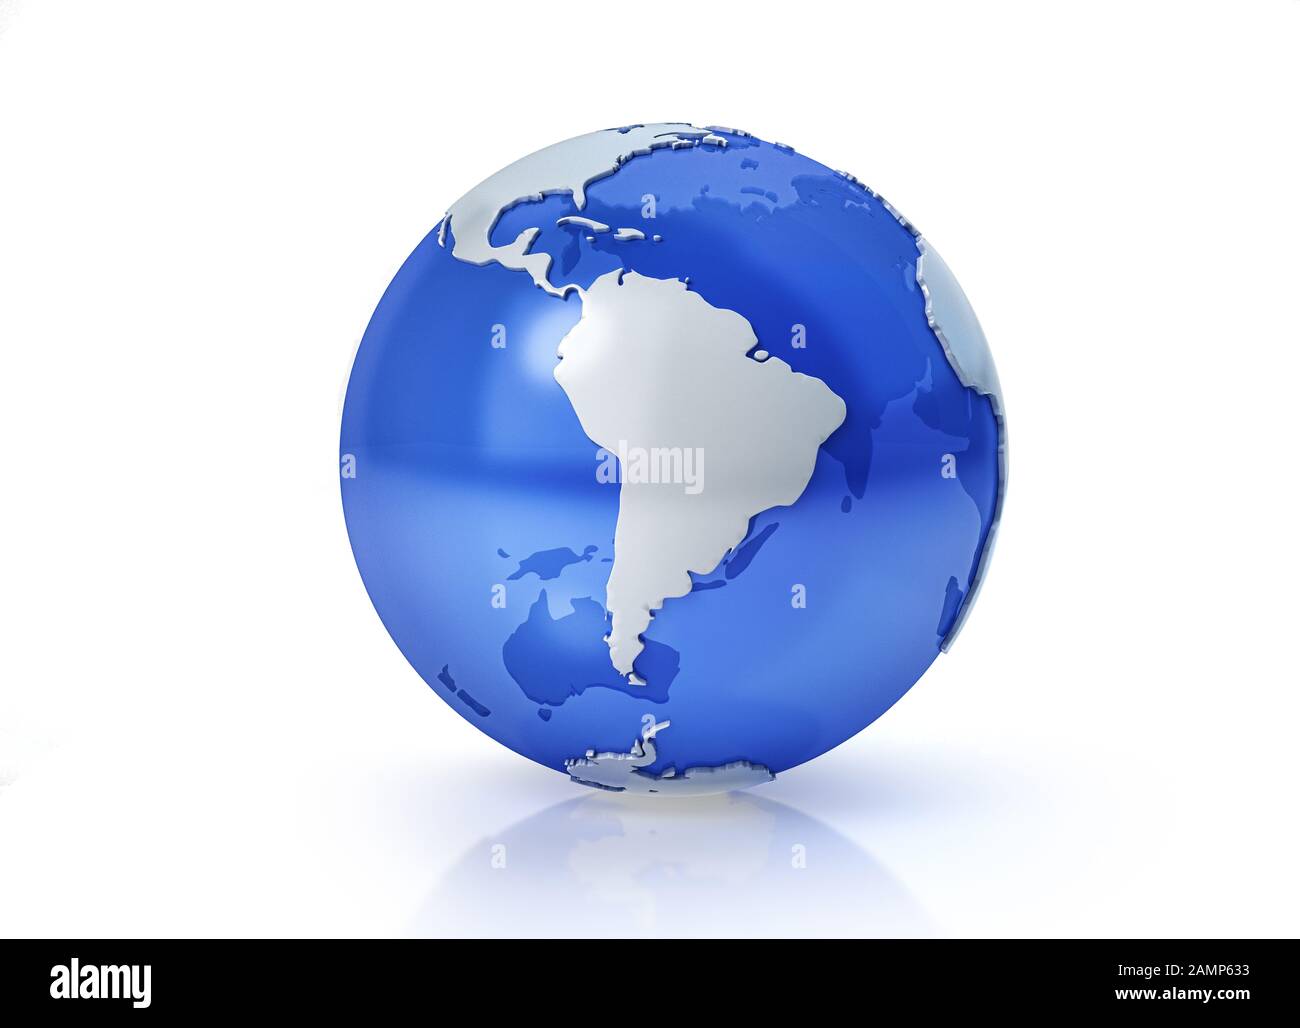 Earth globe stylized. Grey continents in relief. With transparent seas to reveal continents on the other side. On white background. South America view Stock Photo